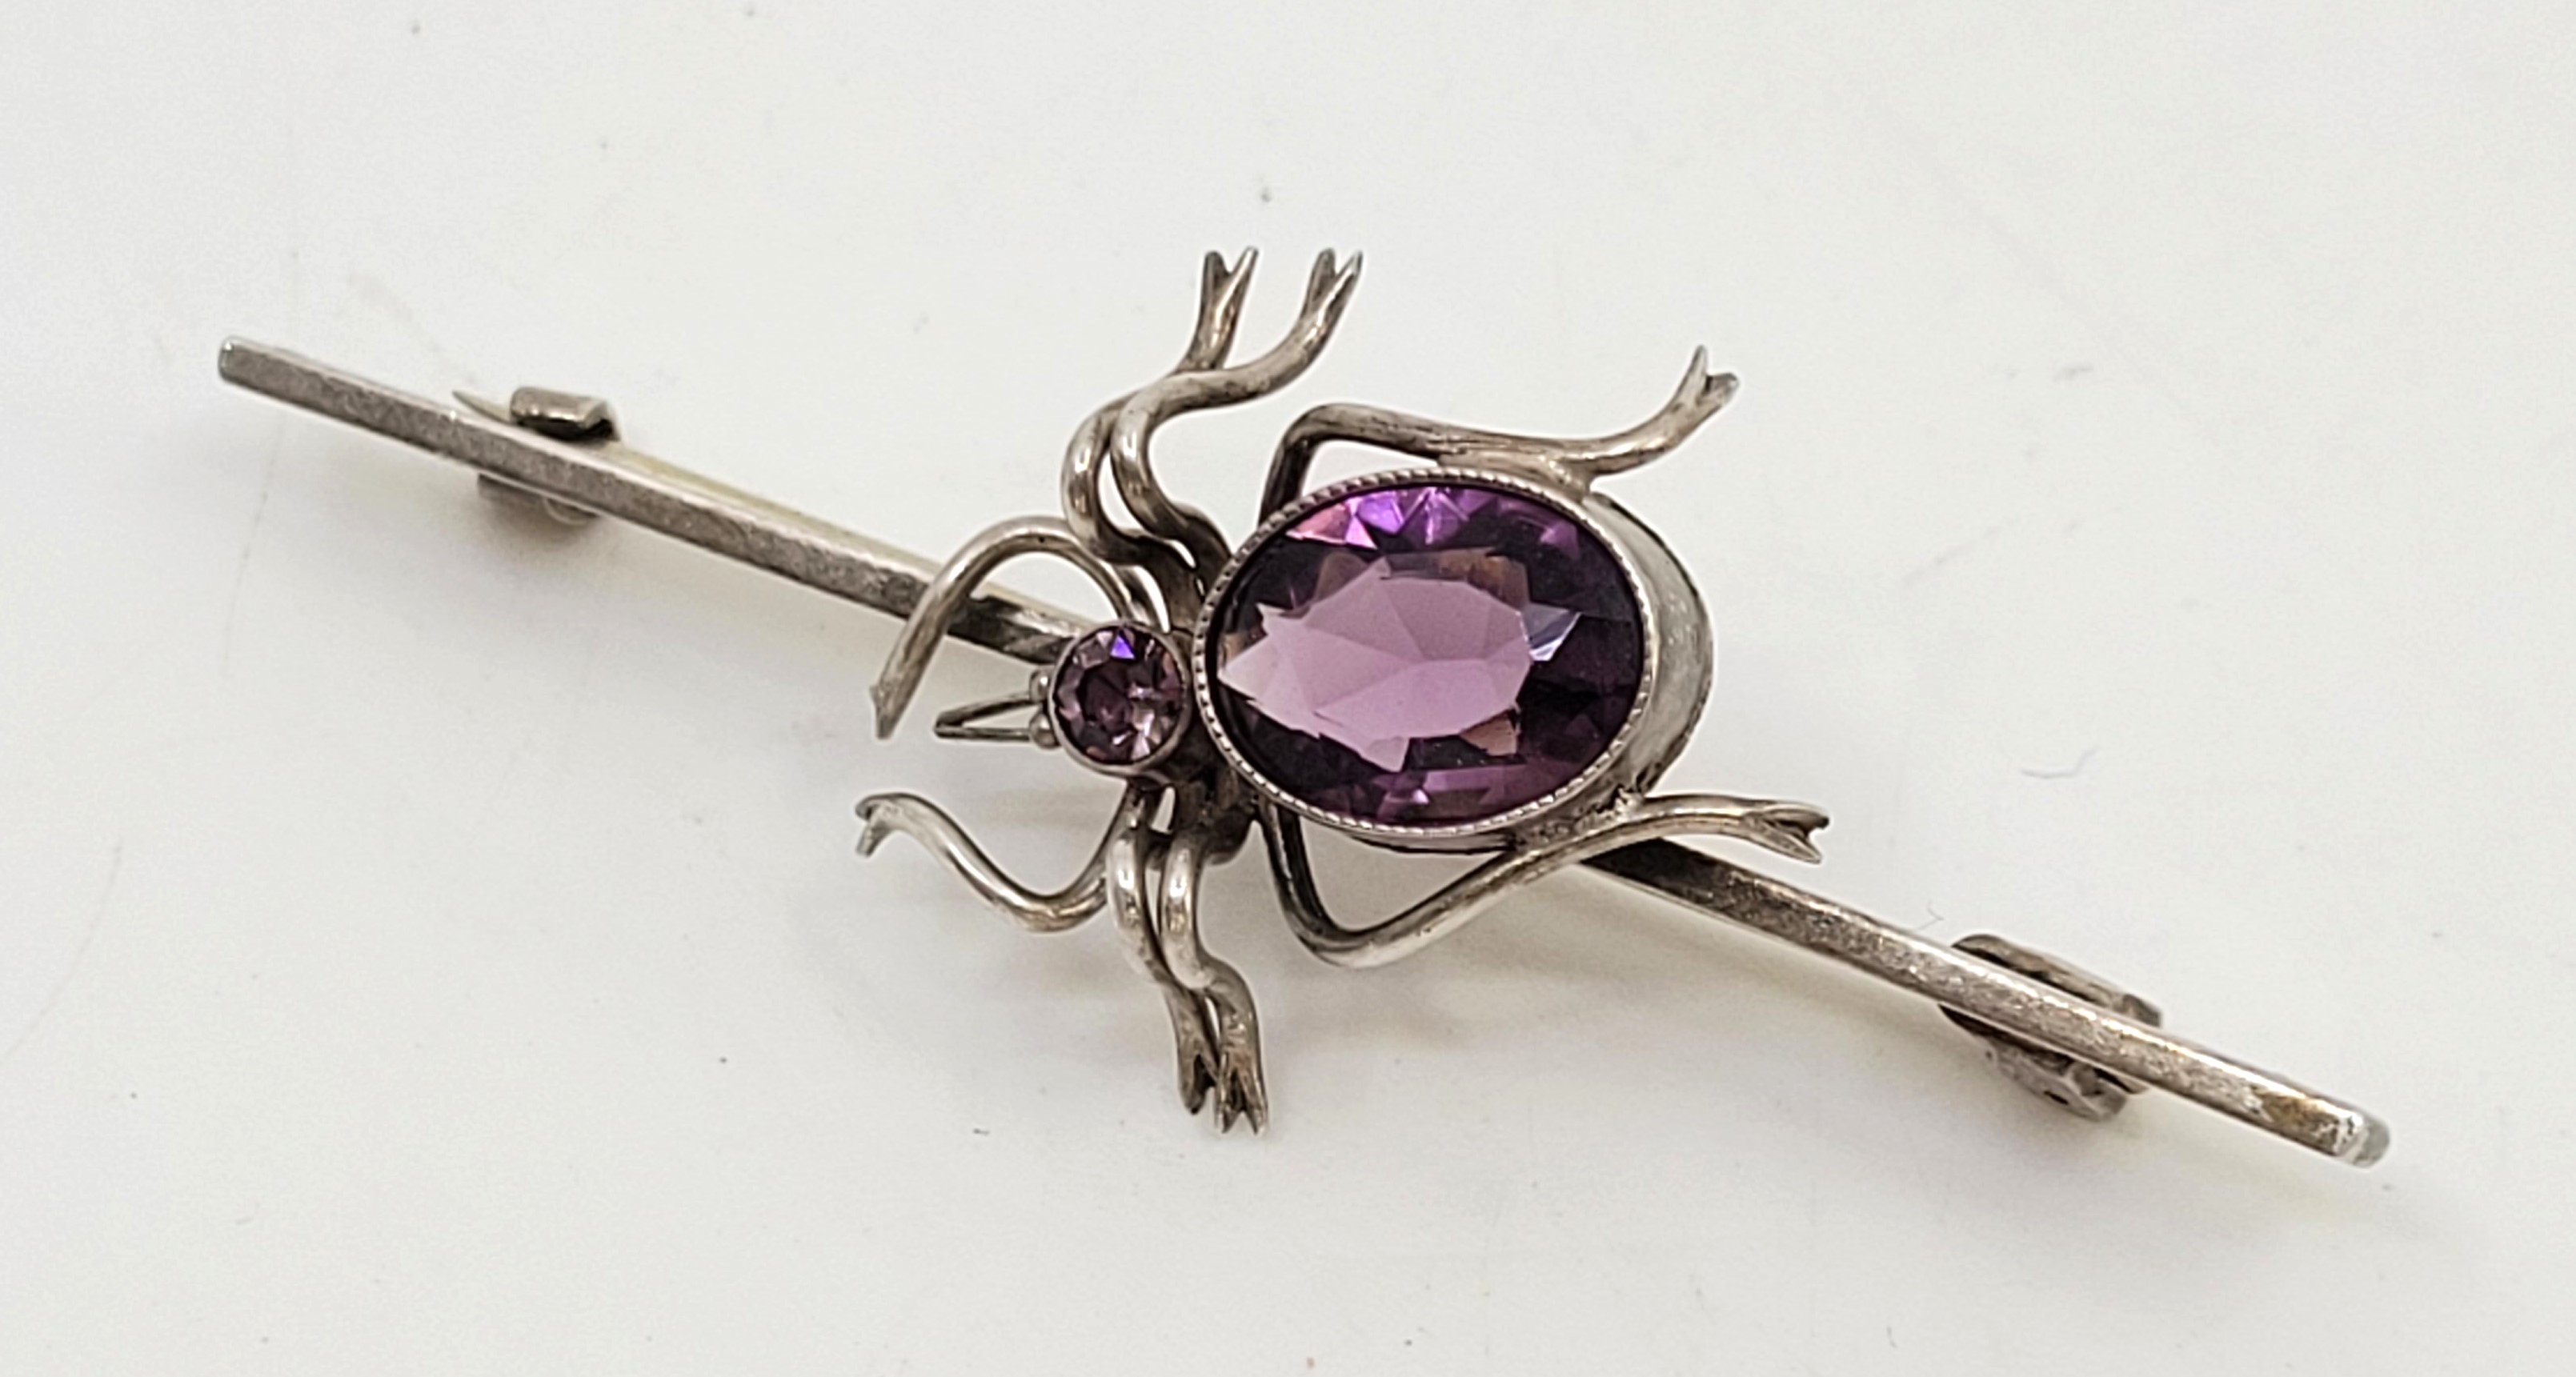 A Charles Horner silver and paste spider brooch, Chester 1921, the spider rub-over set faceted